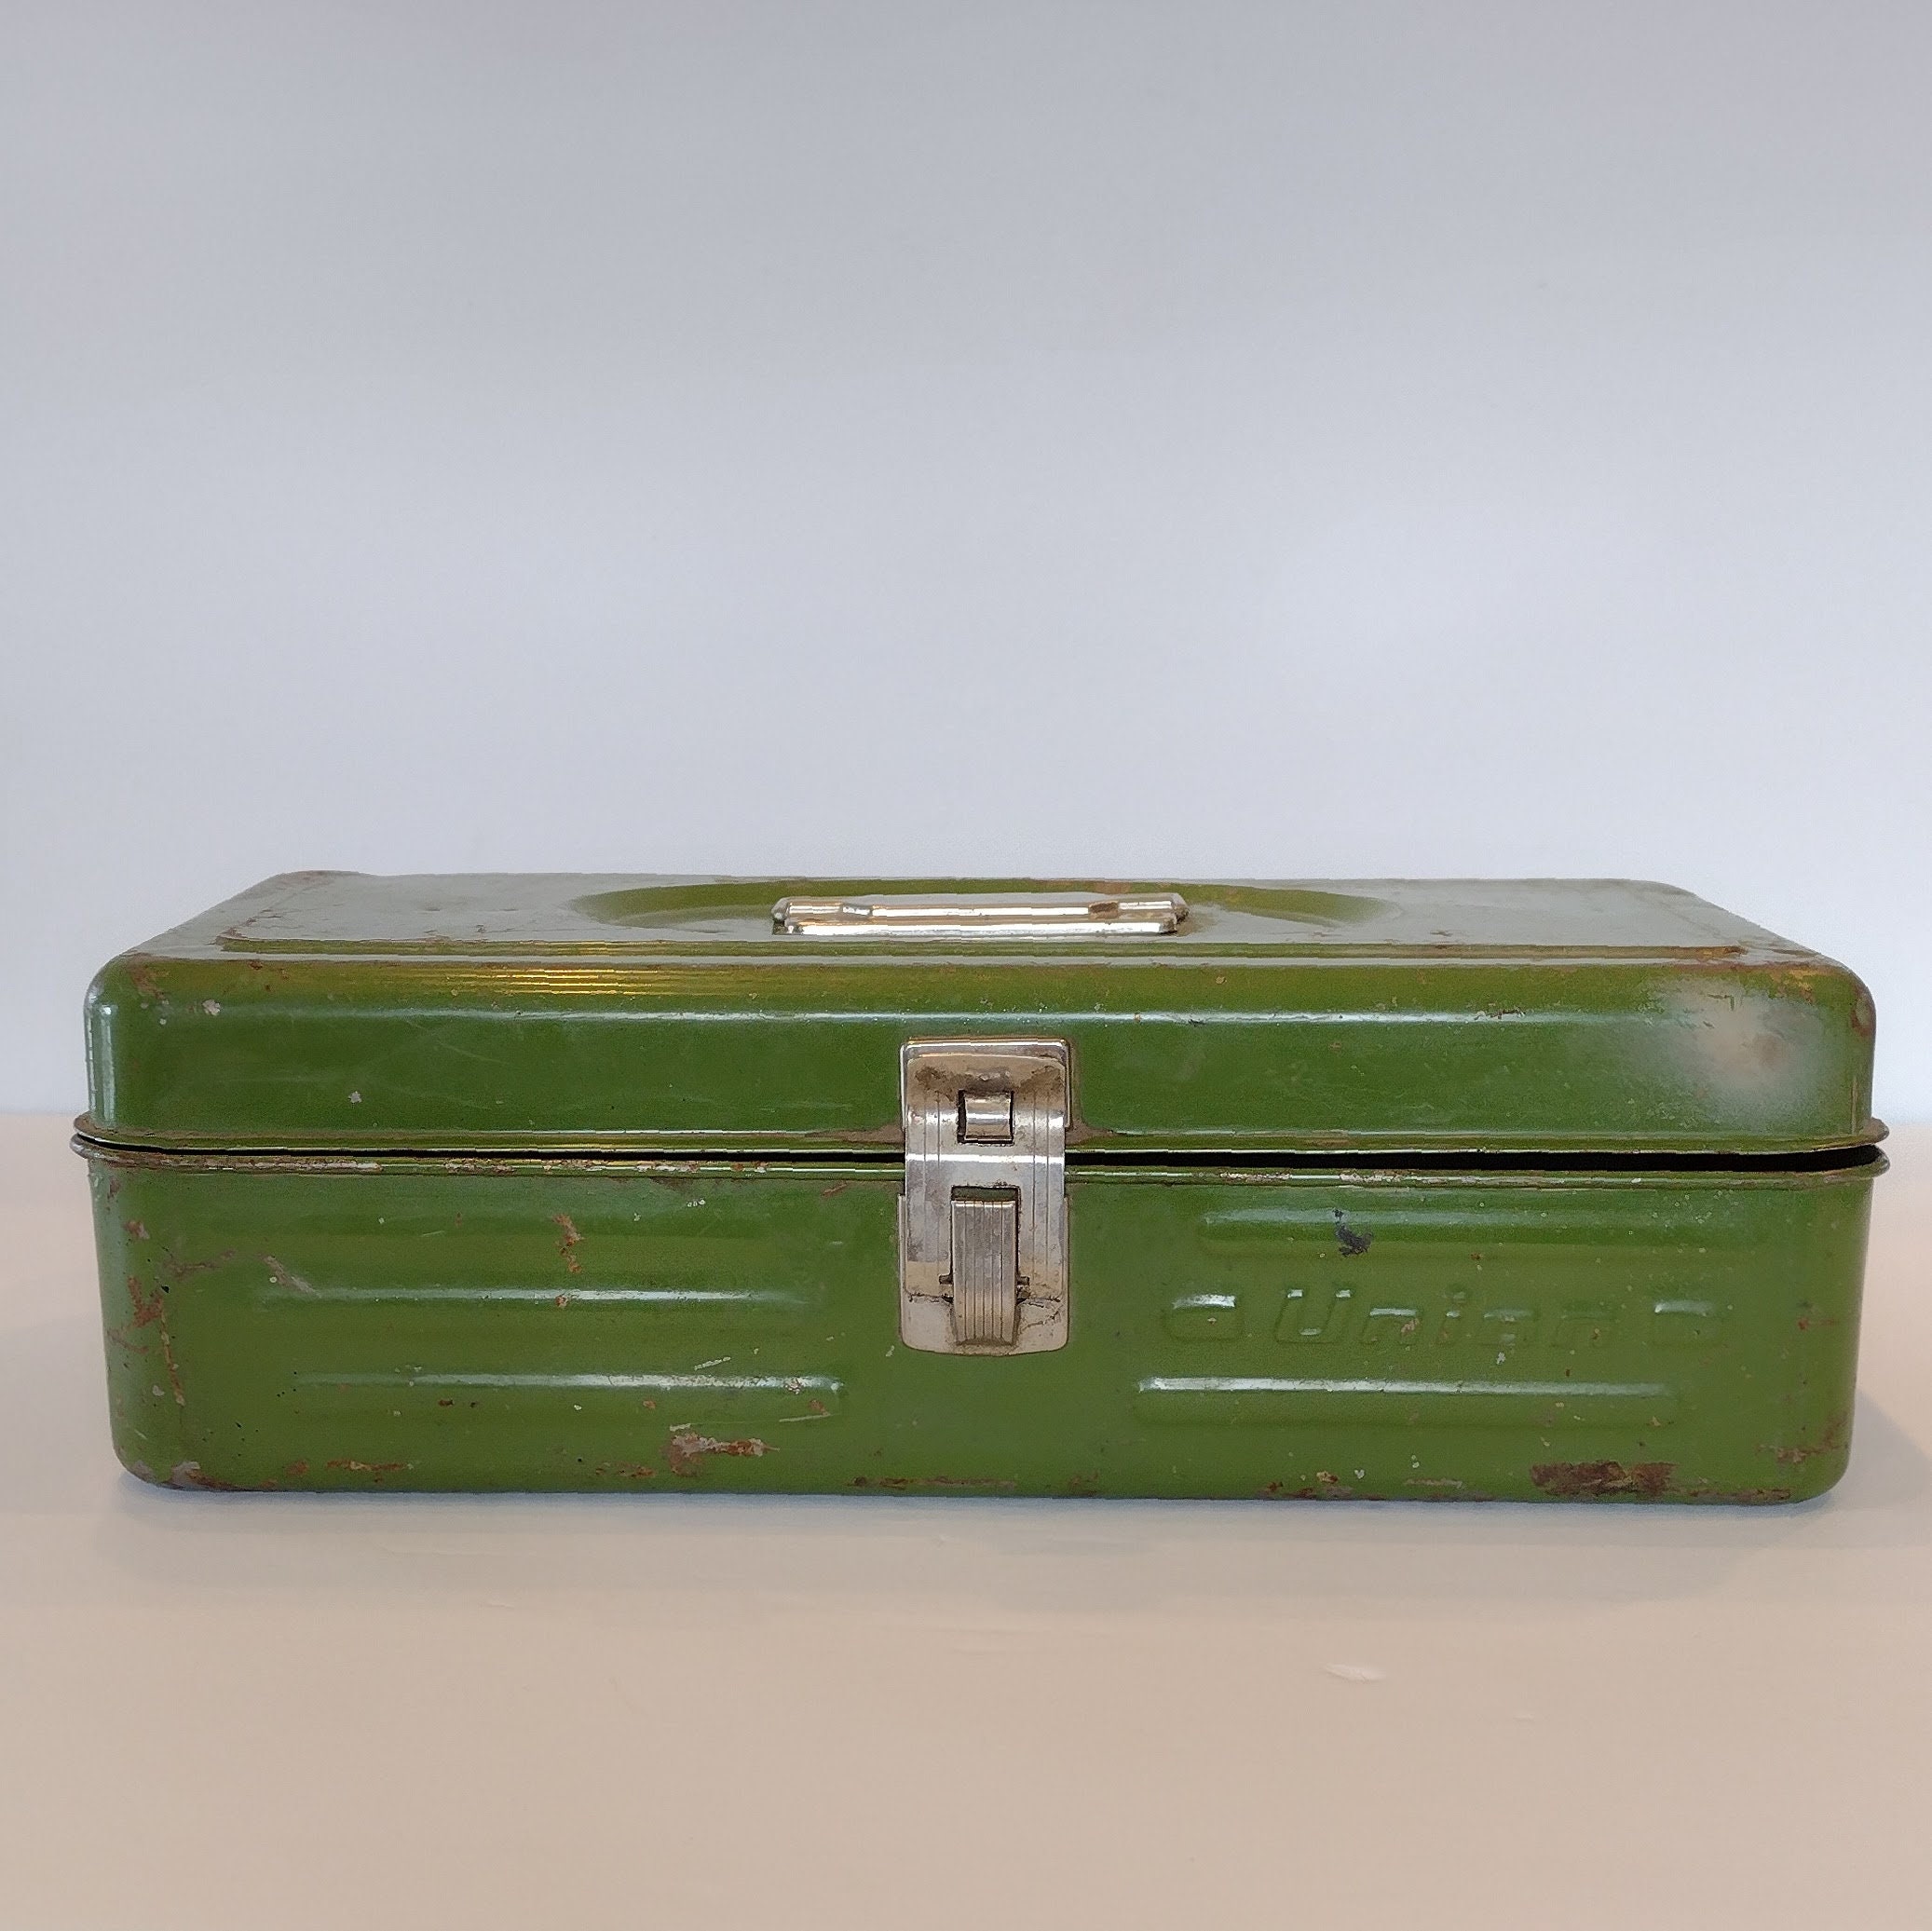 Vintage Tackle Box / Green Fly Fishing Metal Storage Box for Lures